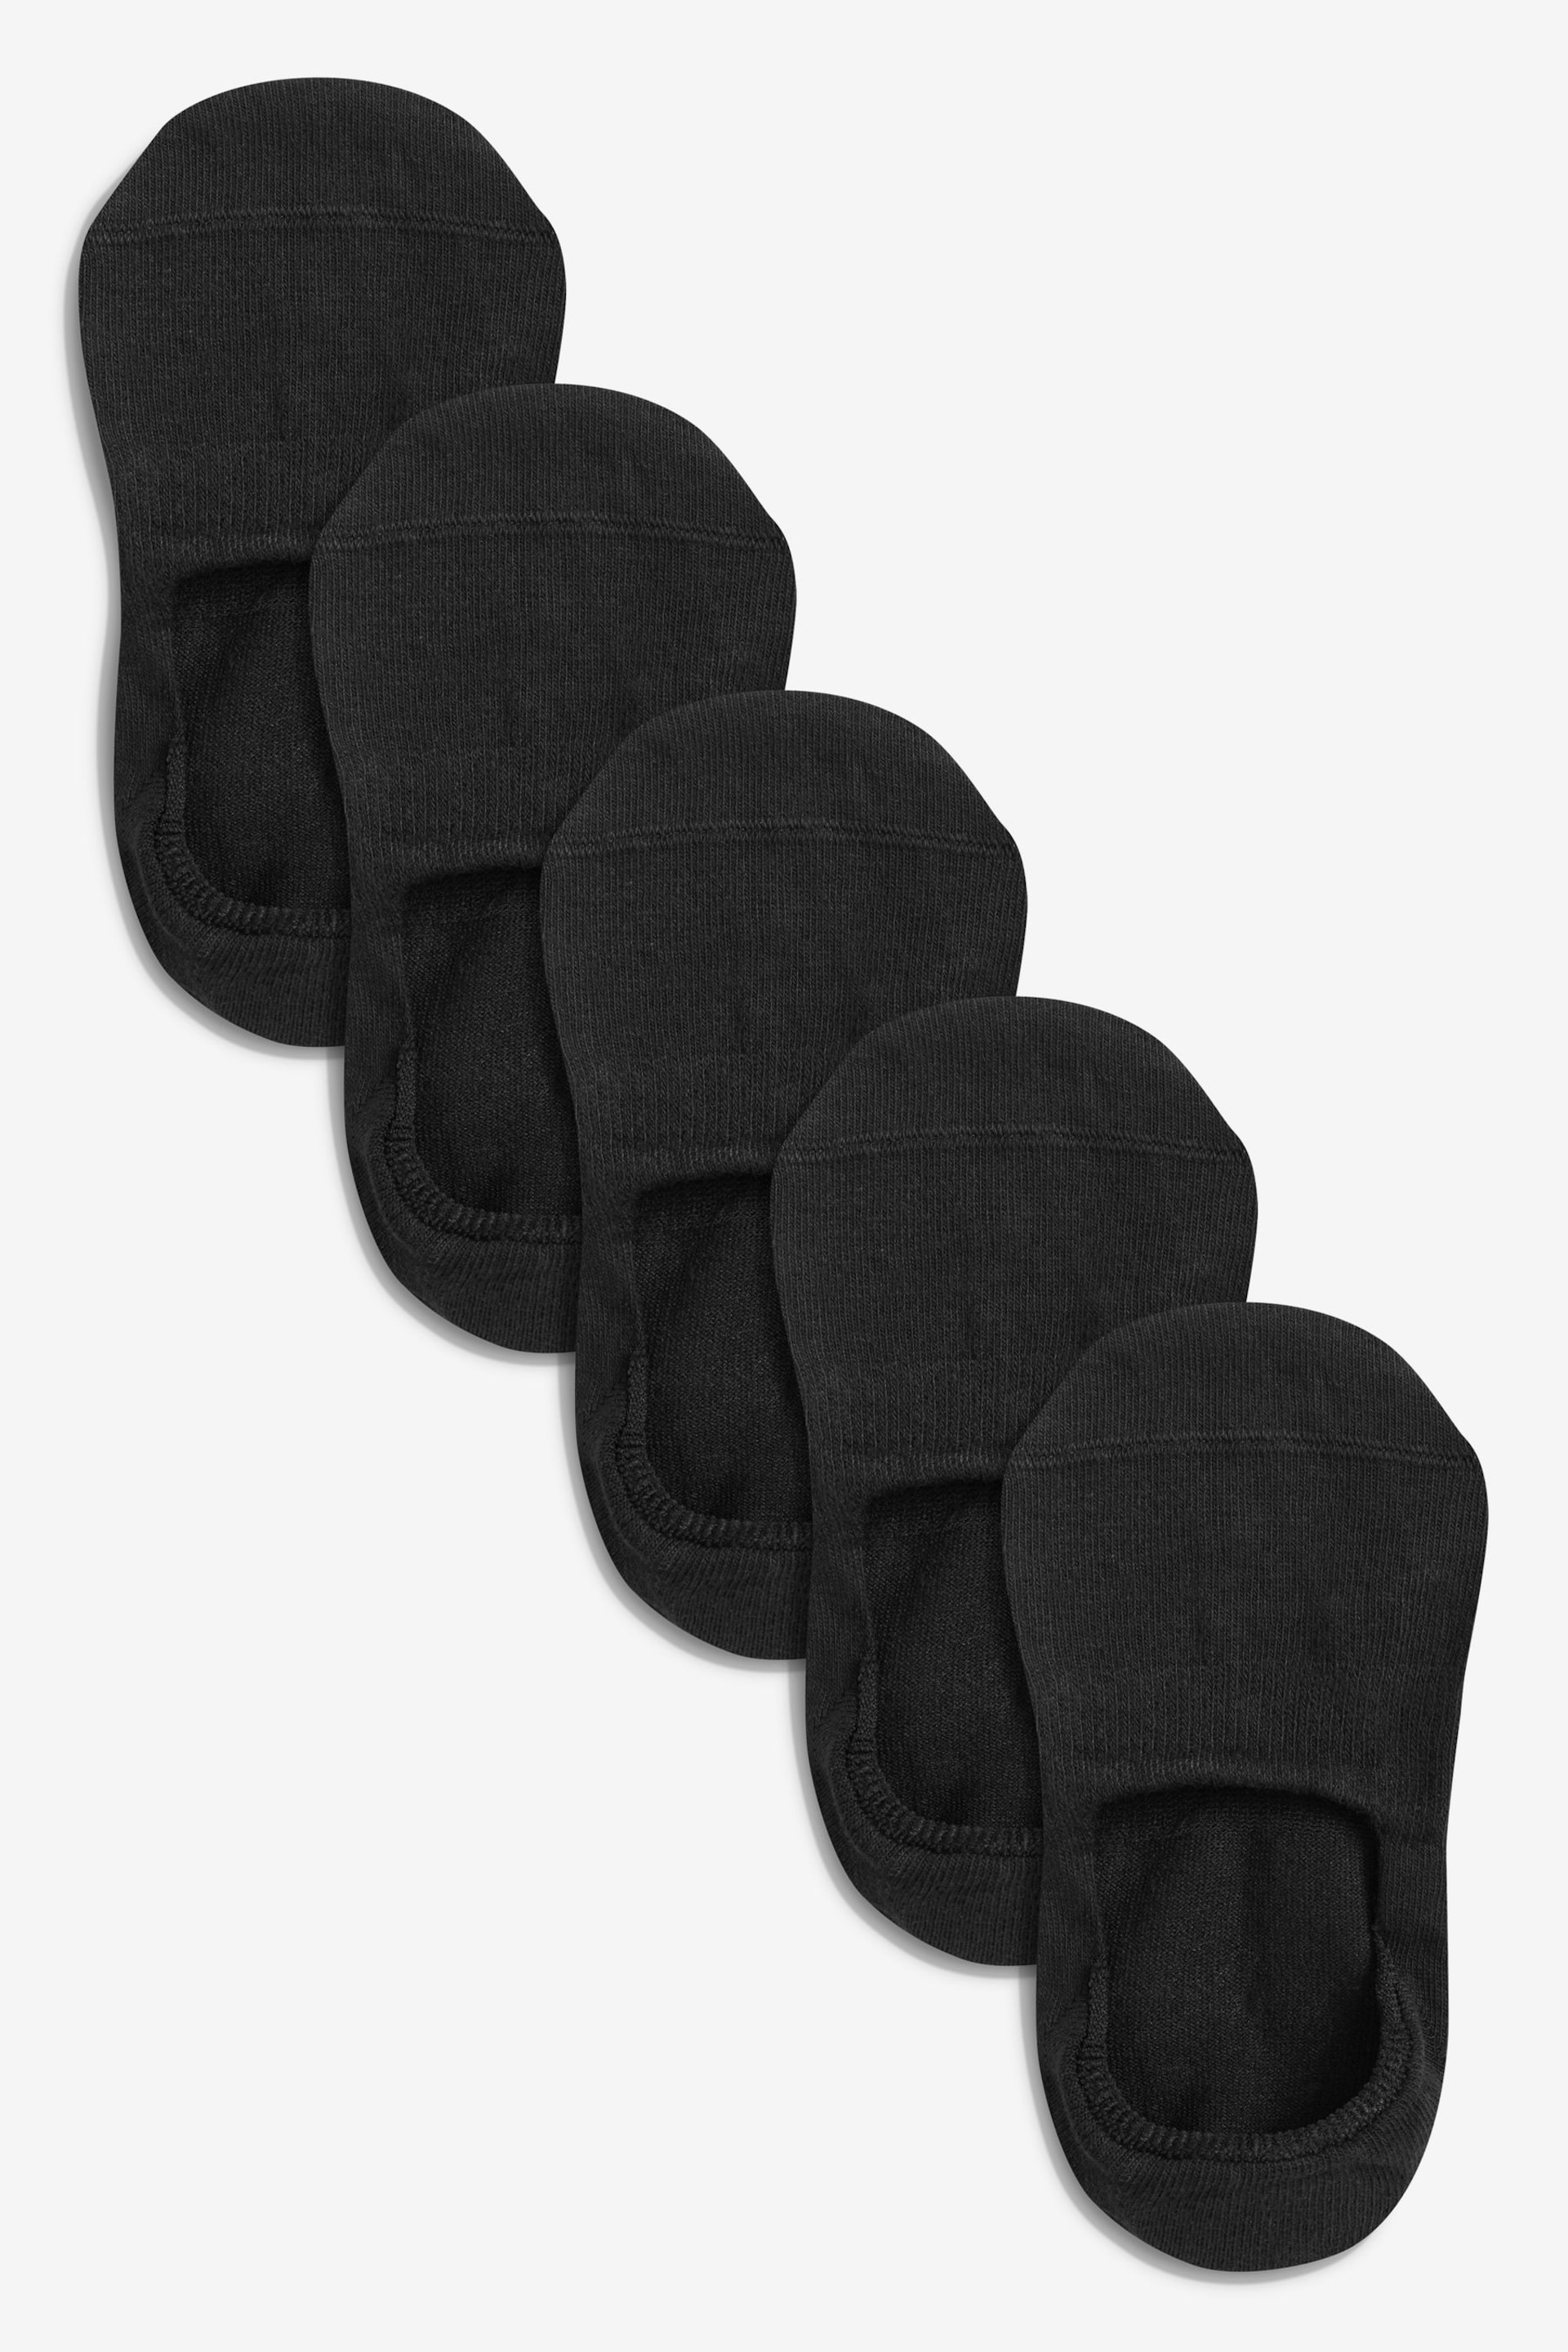 Black Invisible Trainer Socks Five Pack - Image 1 of 2